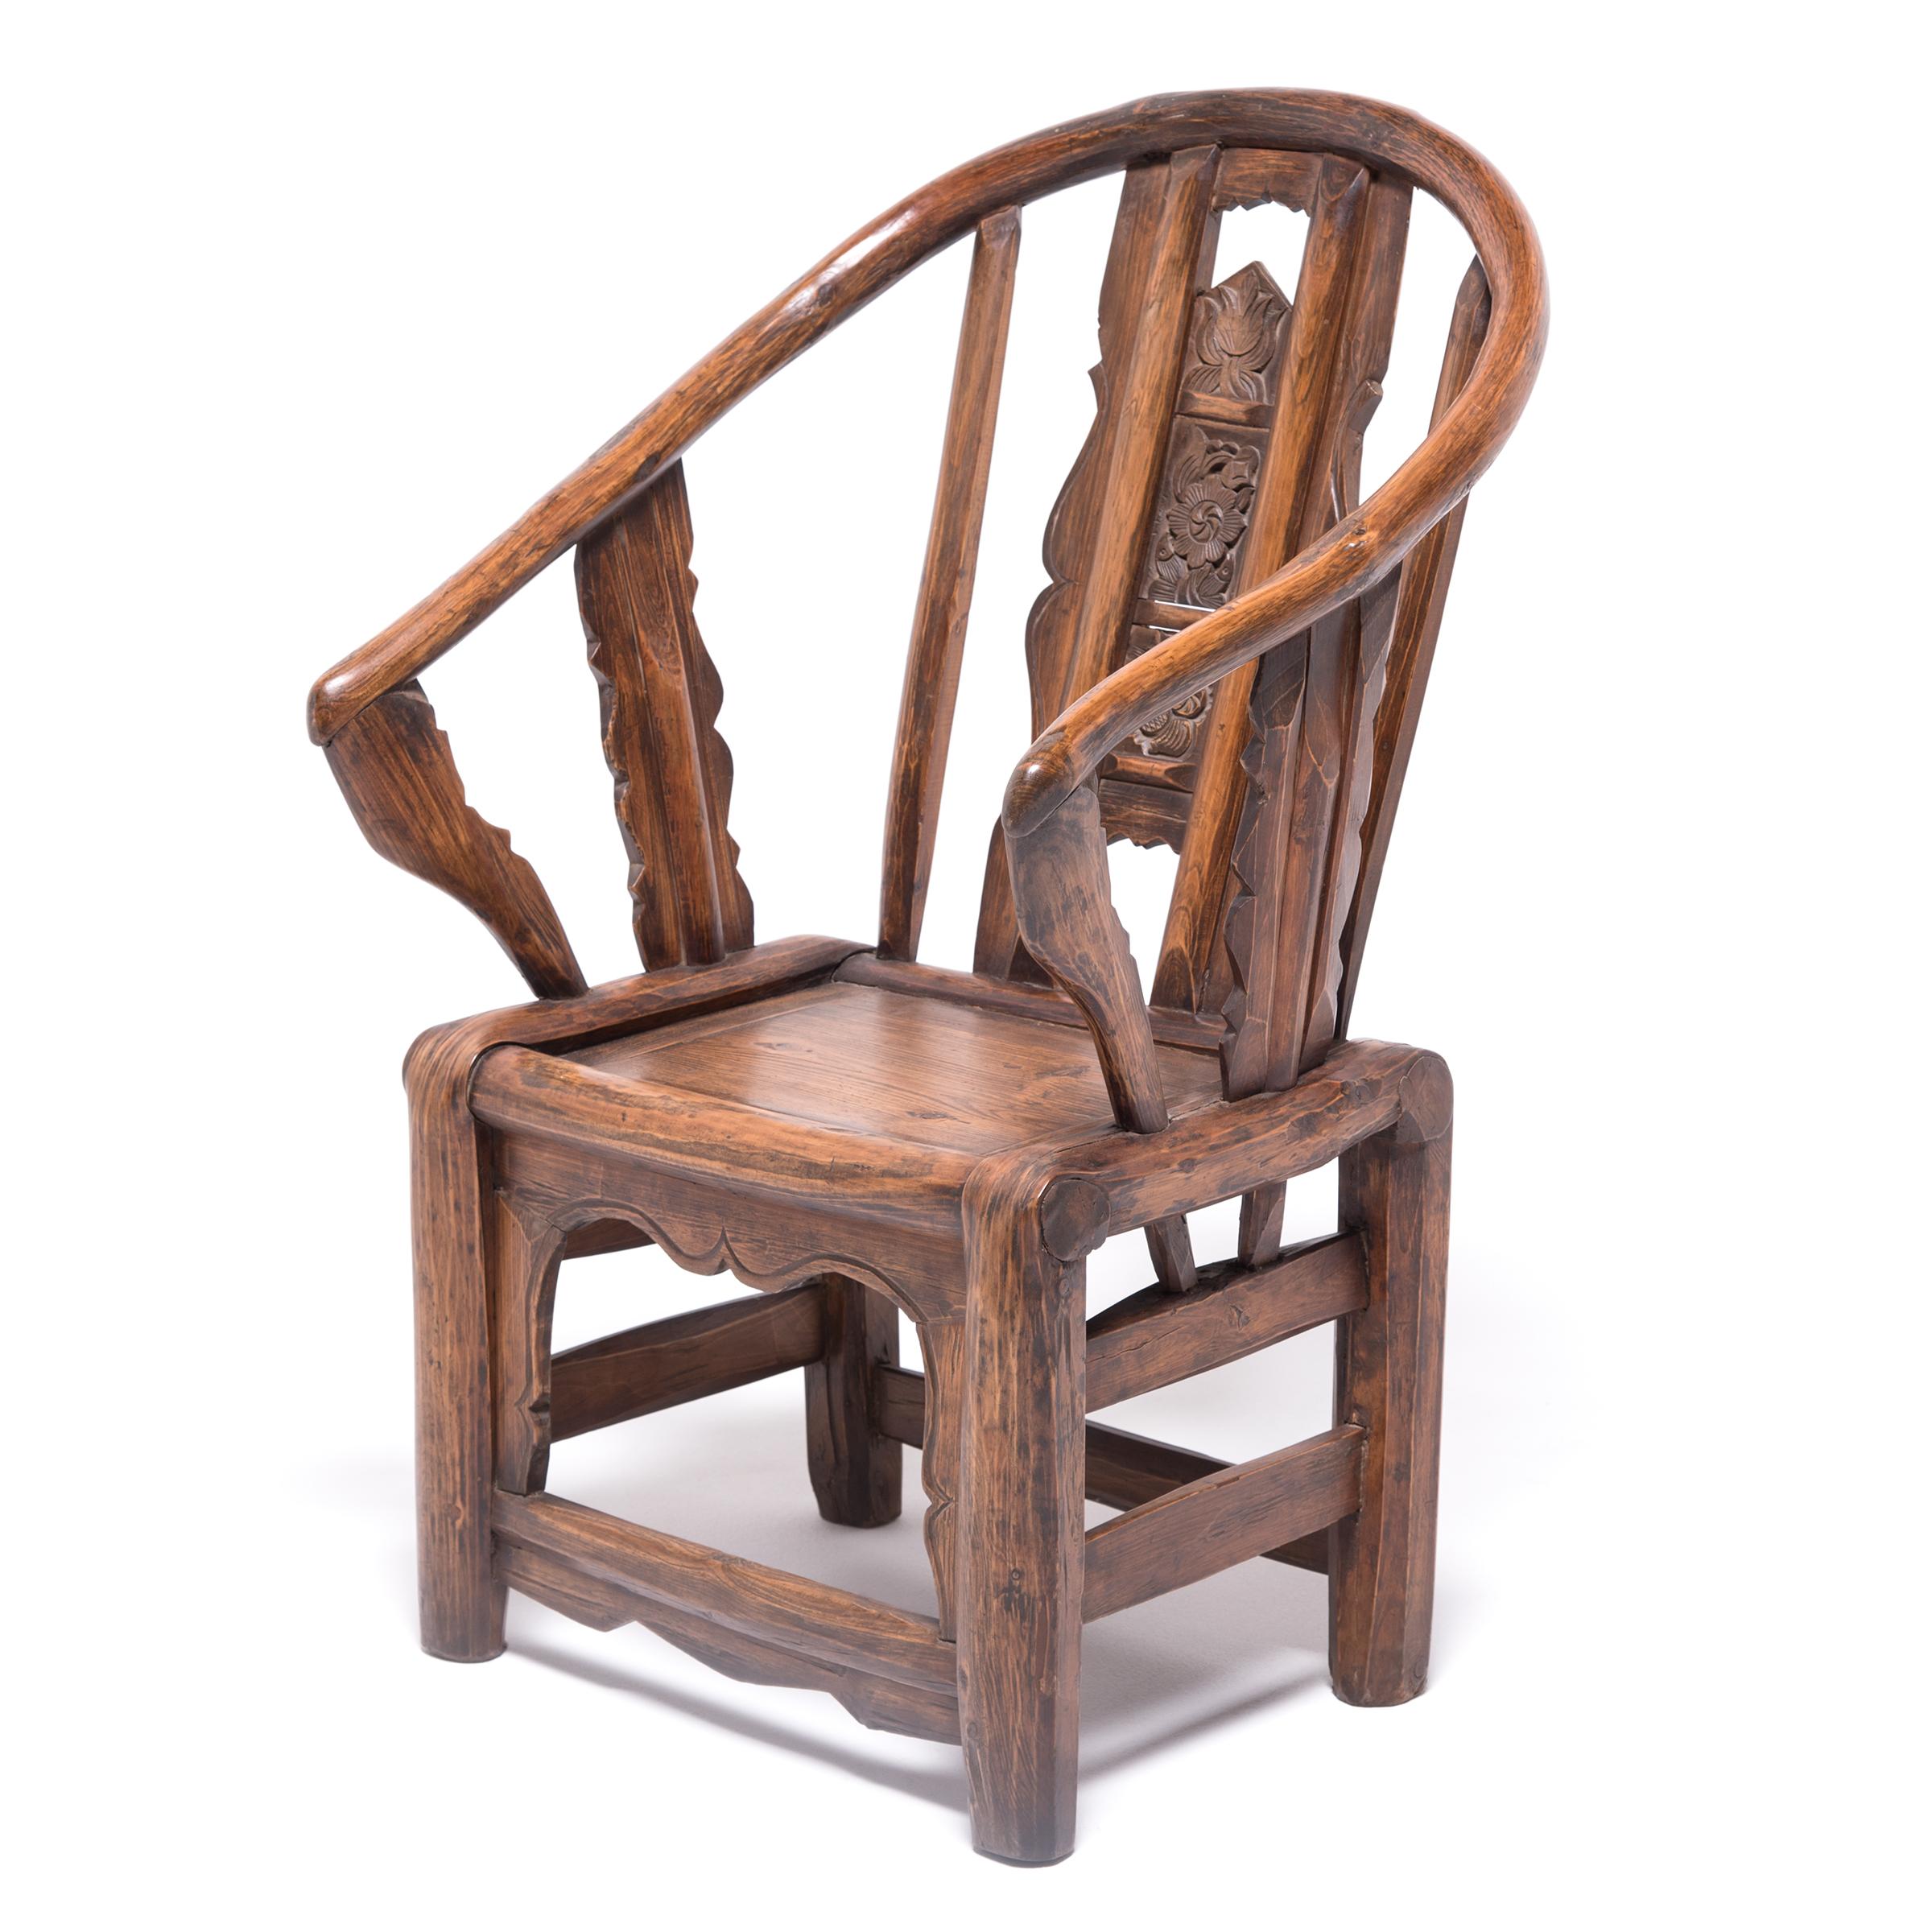 Qing Low Chinese Bentwood Chair, c. 1850 For Sale